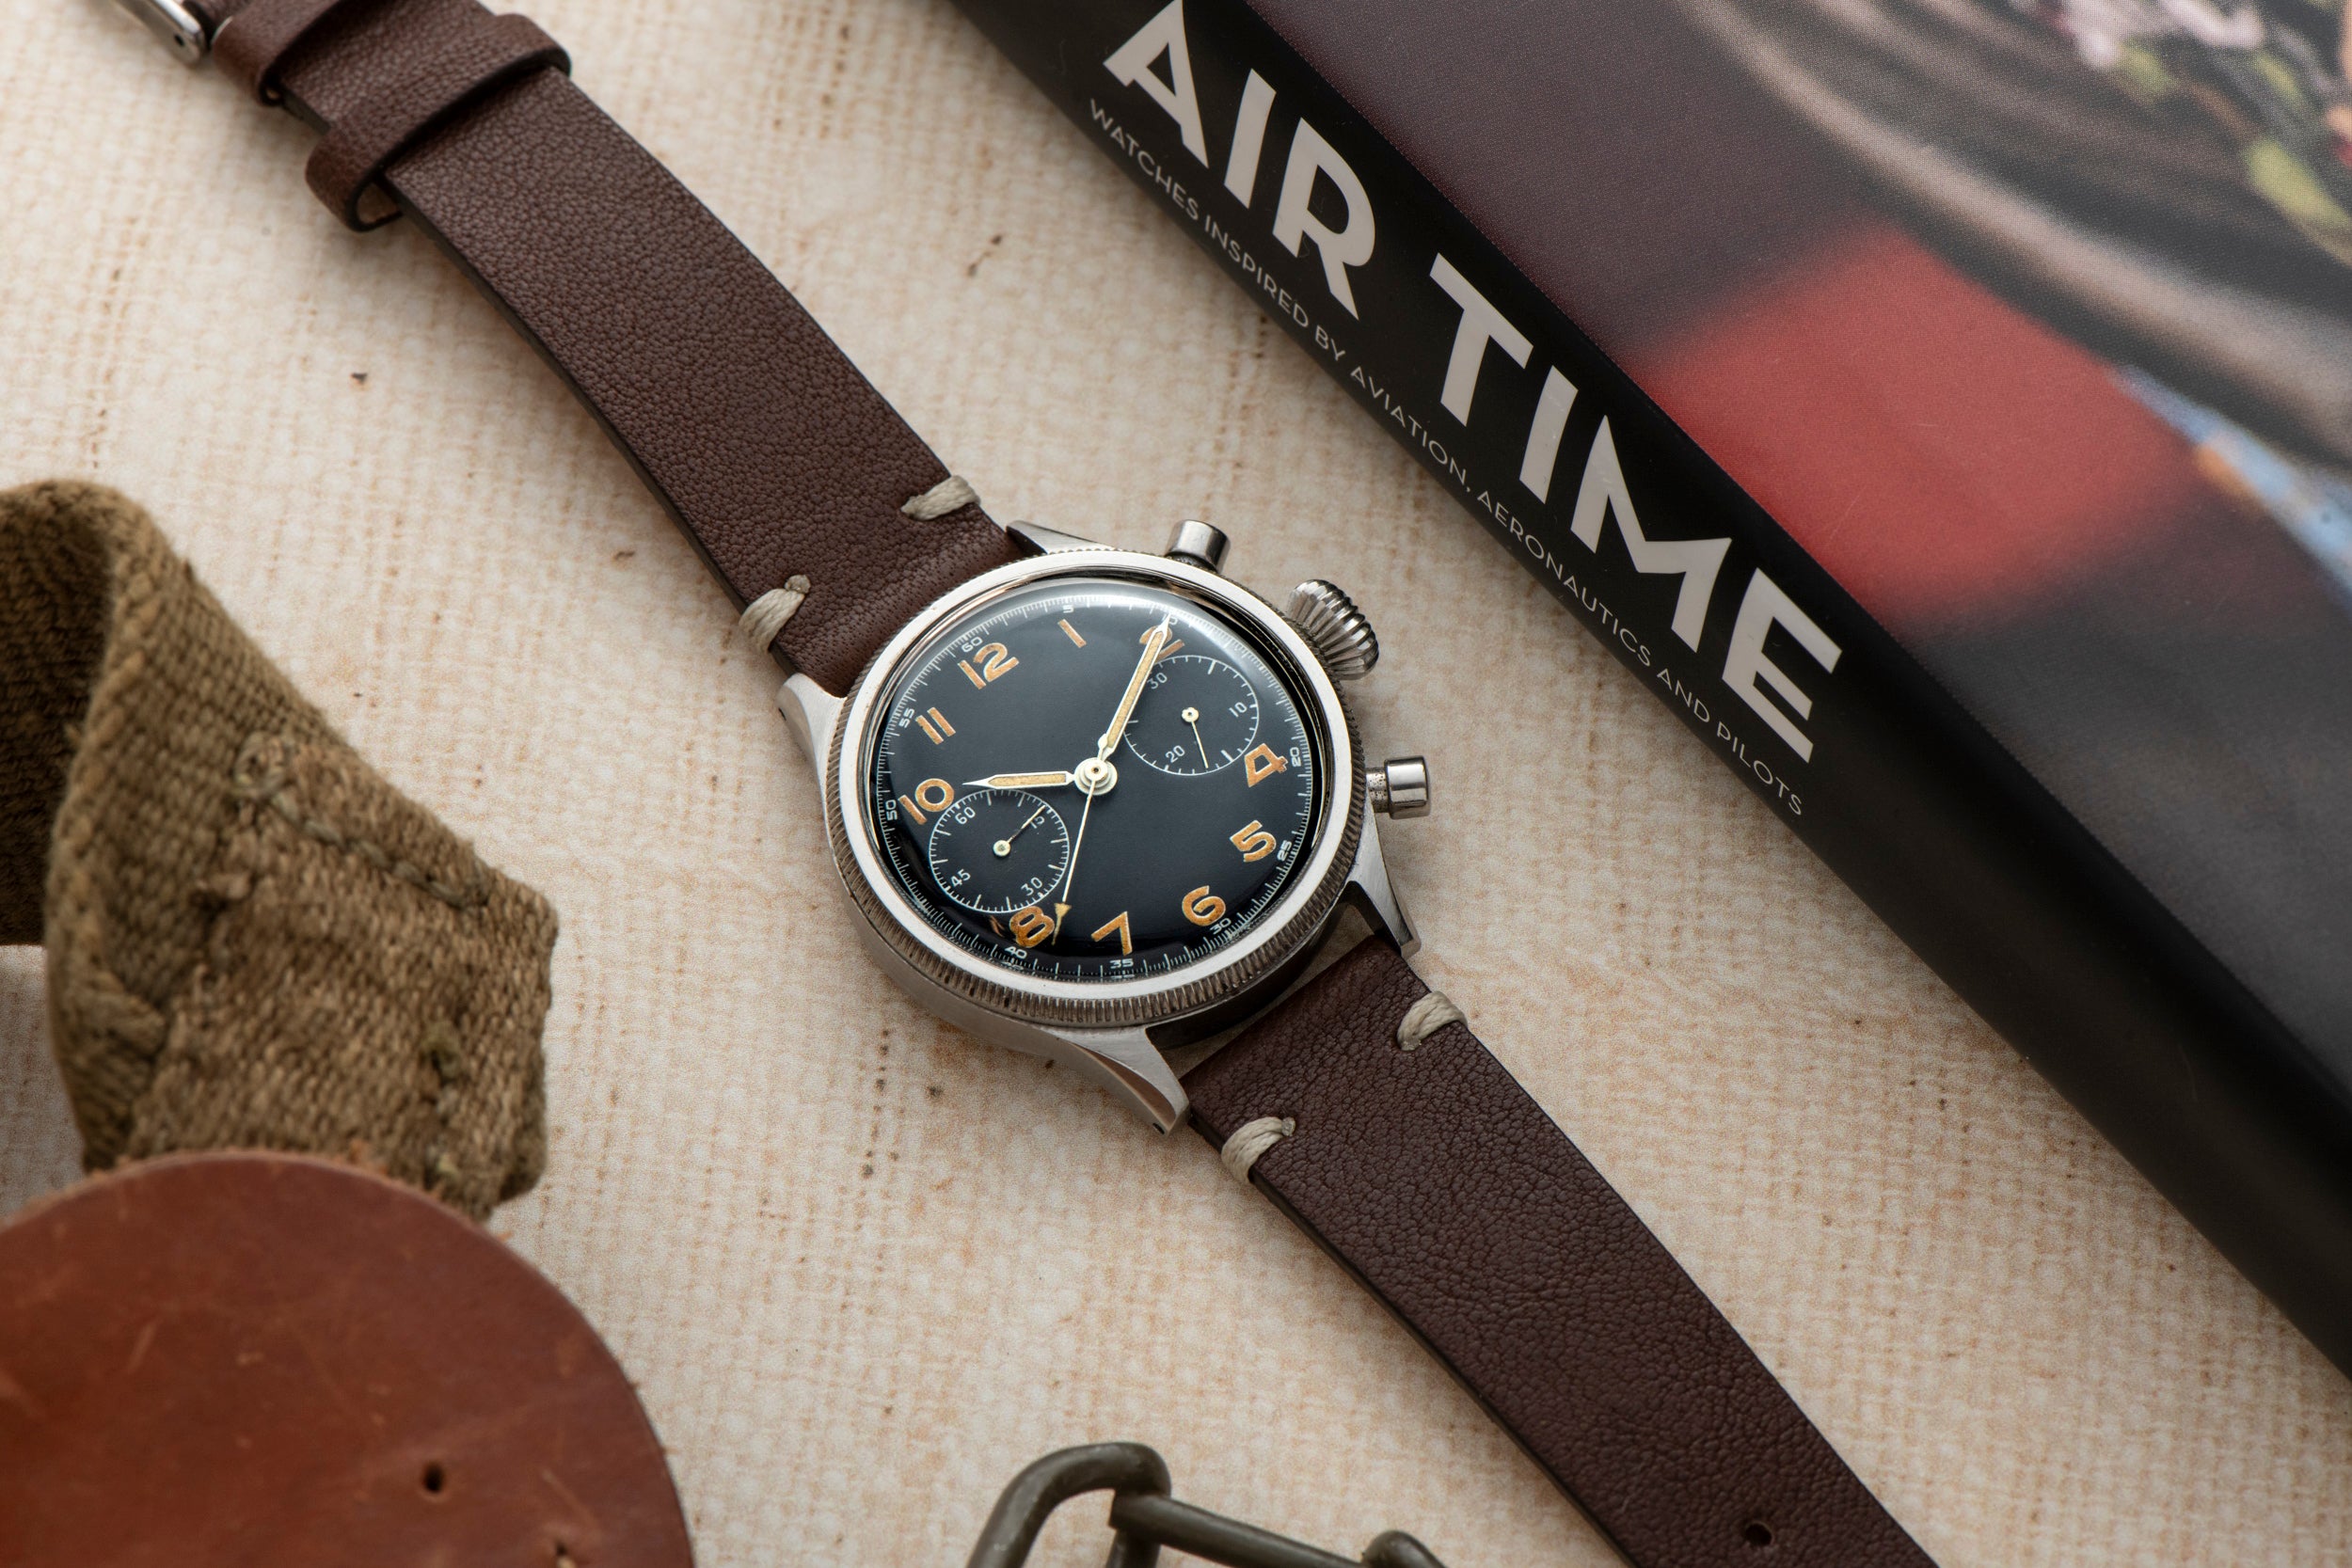 Breguet Type XX 'Sterile' Dial Flyback Chronograph